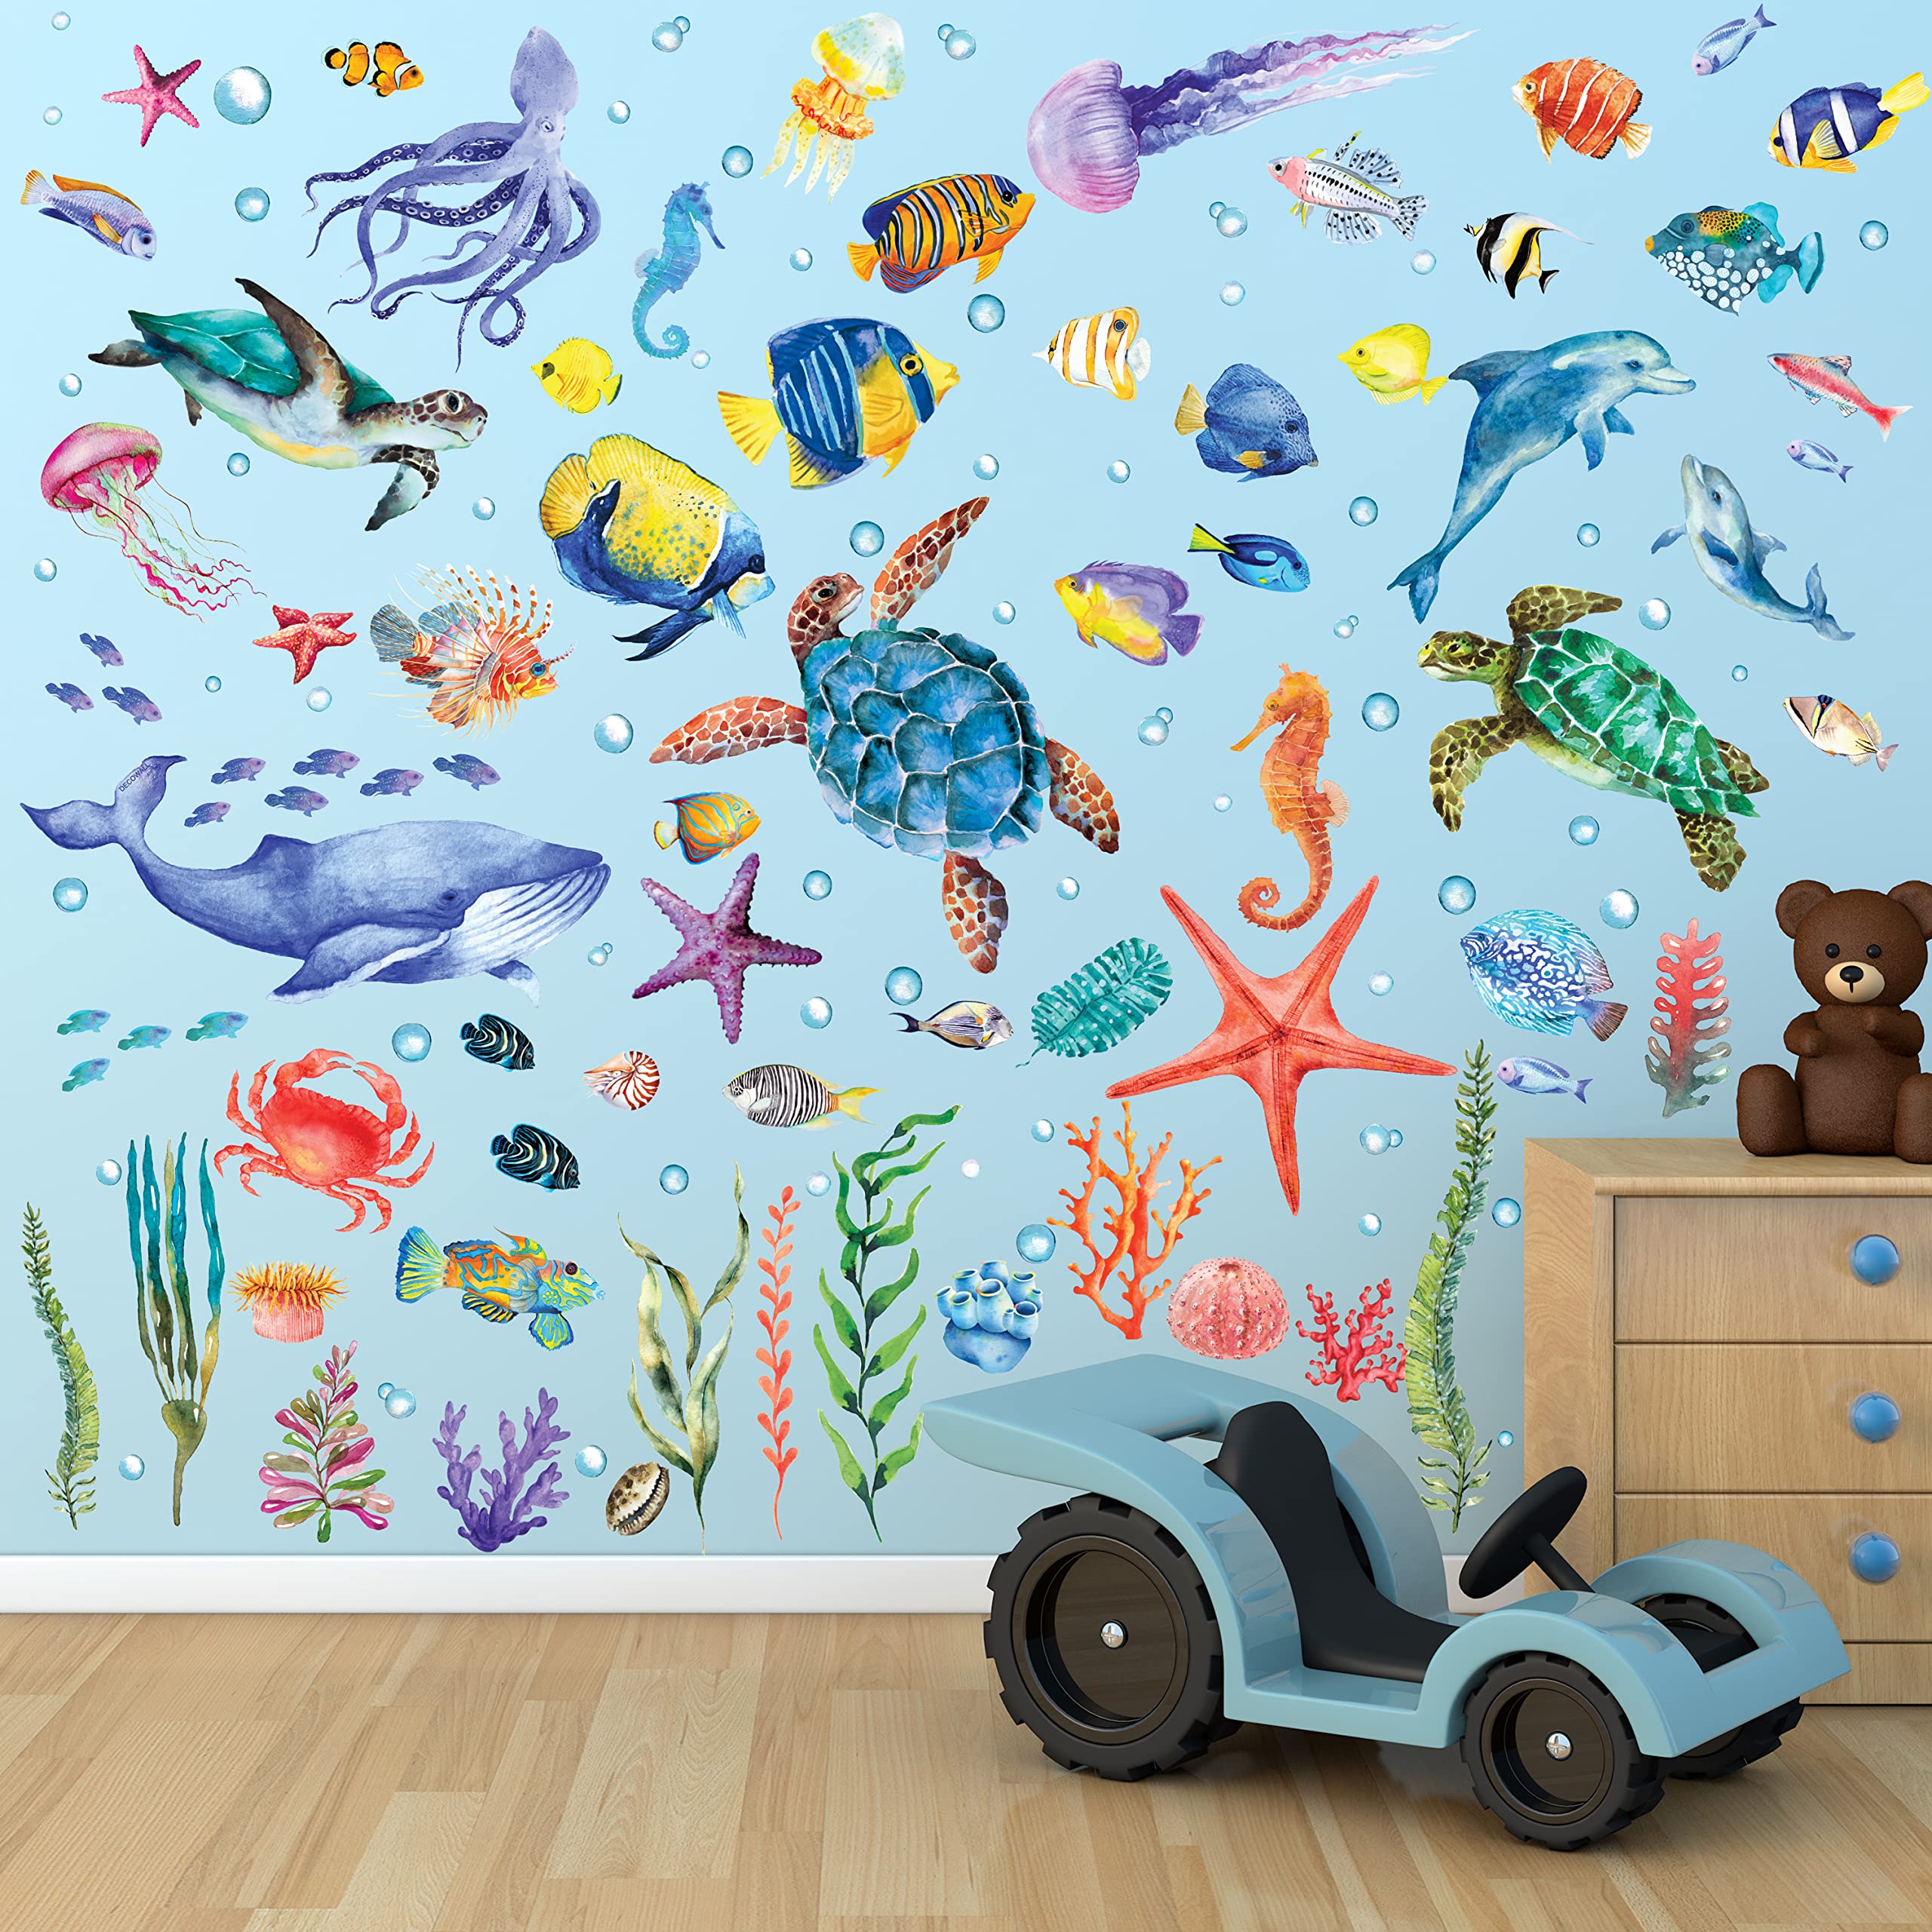 BASHOM BS-107 Under The Sea Wall Stickers Ocean Fish Decals Turtle Jellyfish Removable for Kids Bedroom Nursery Living Room Art Home décor Bathroom